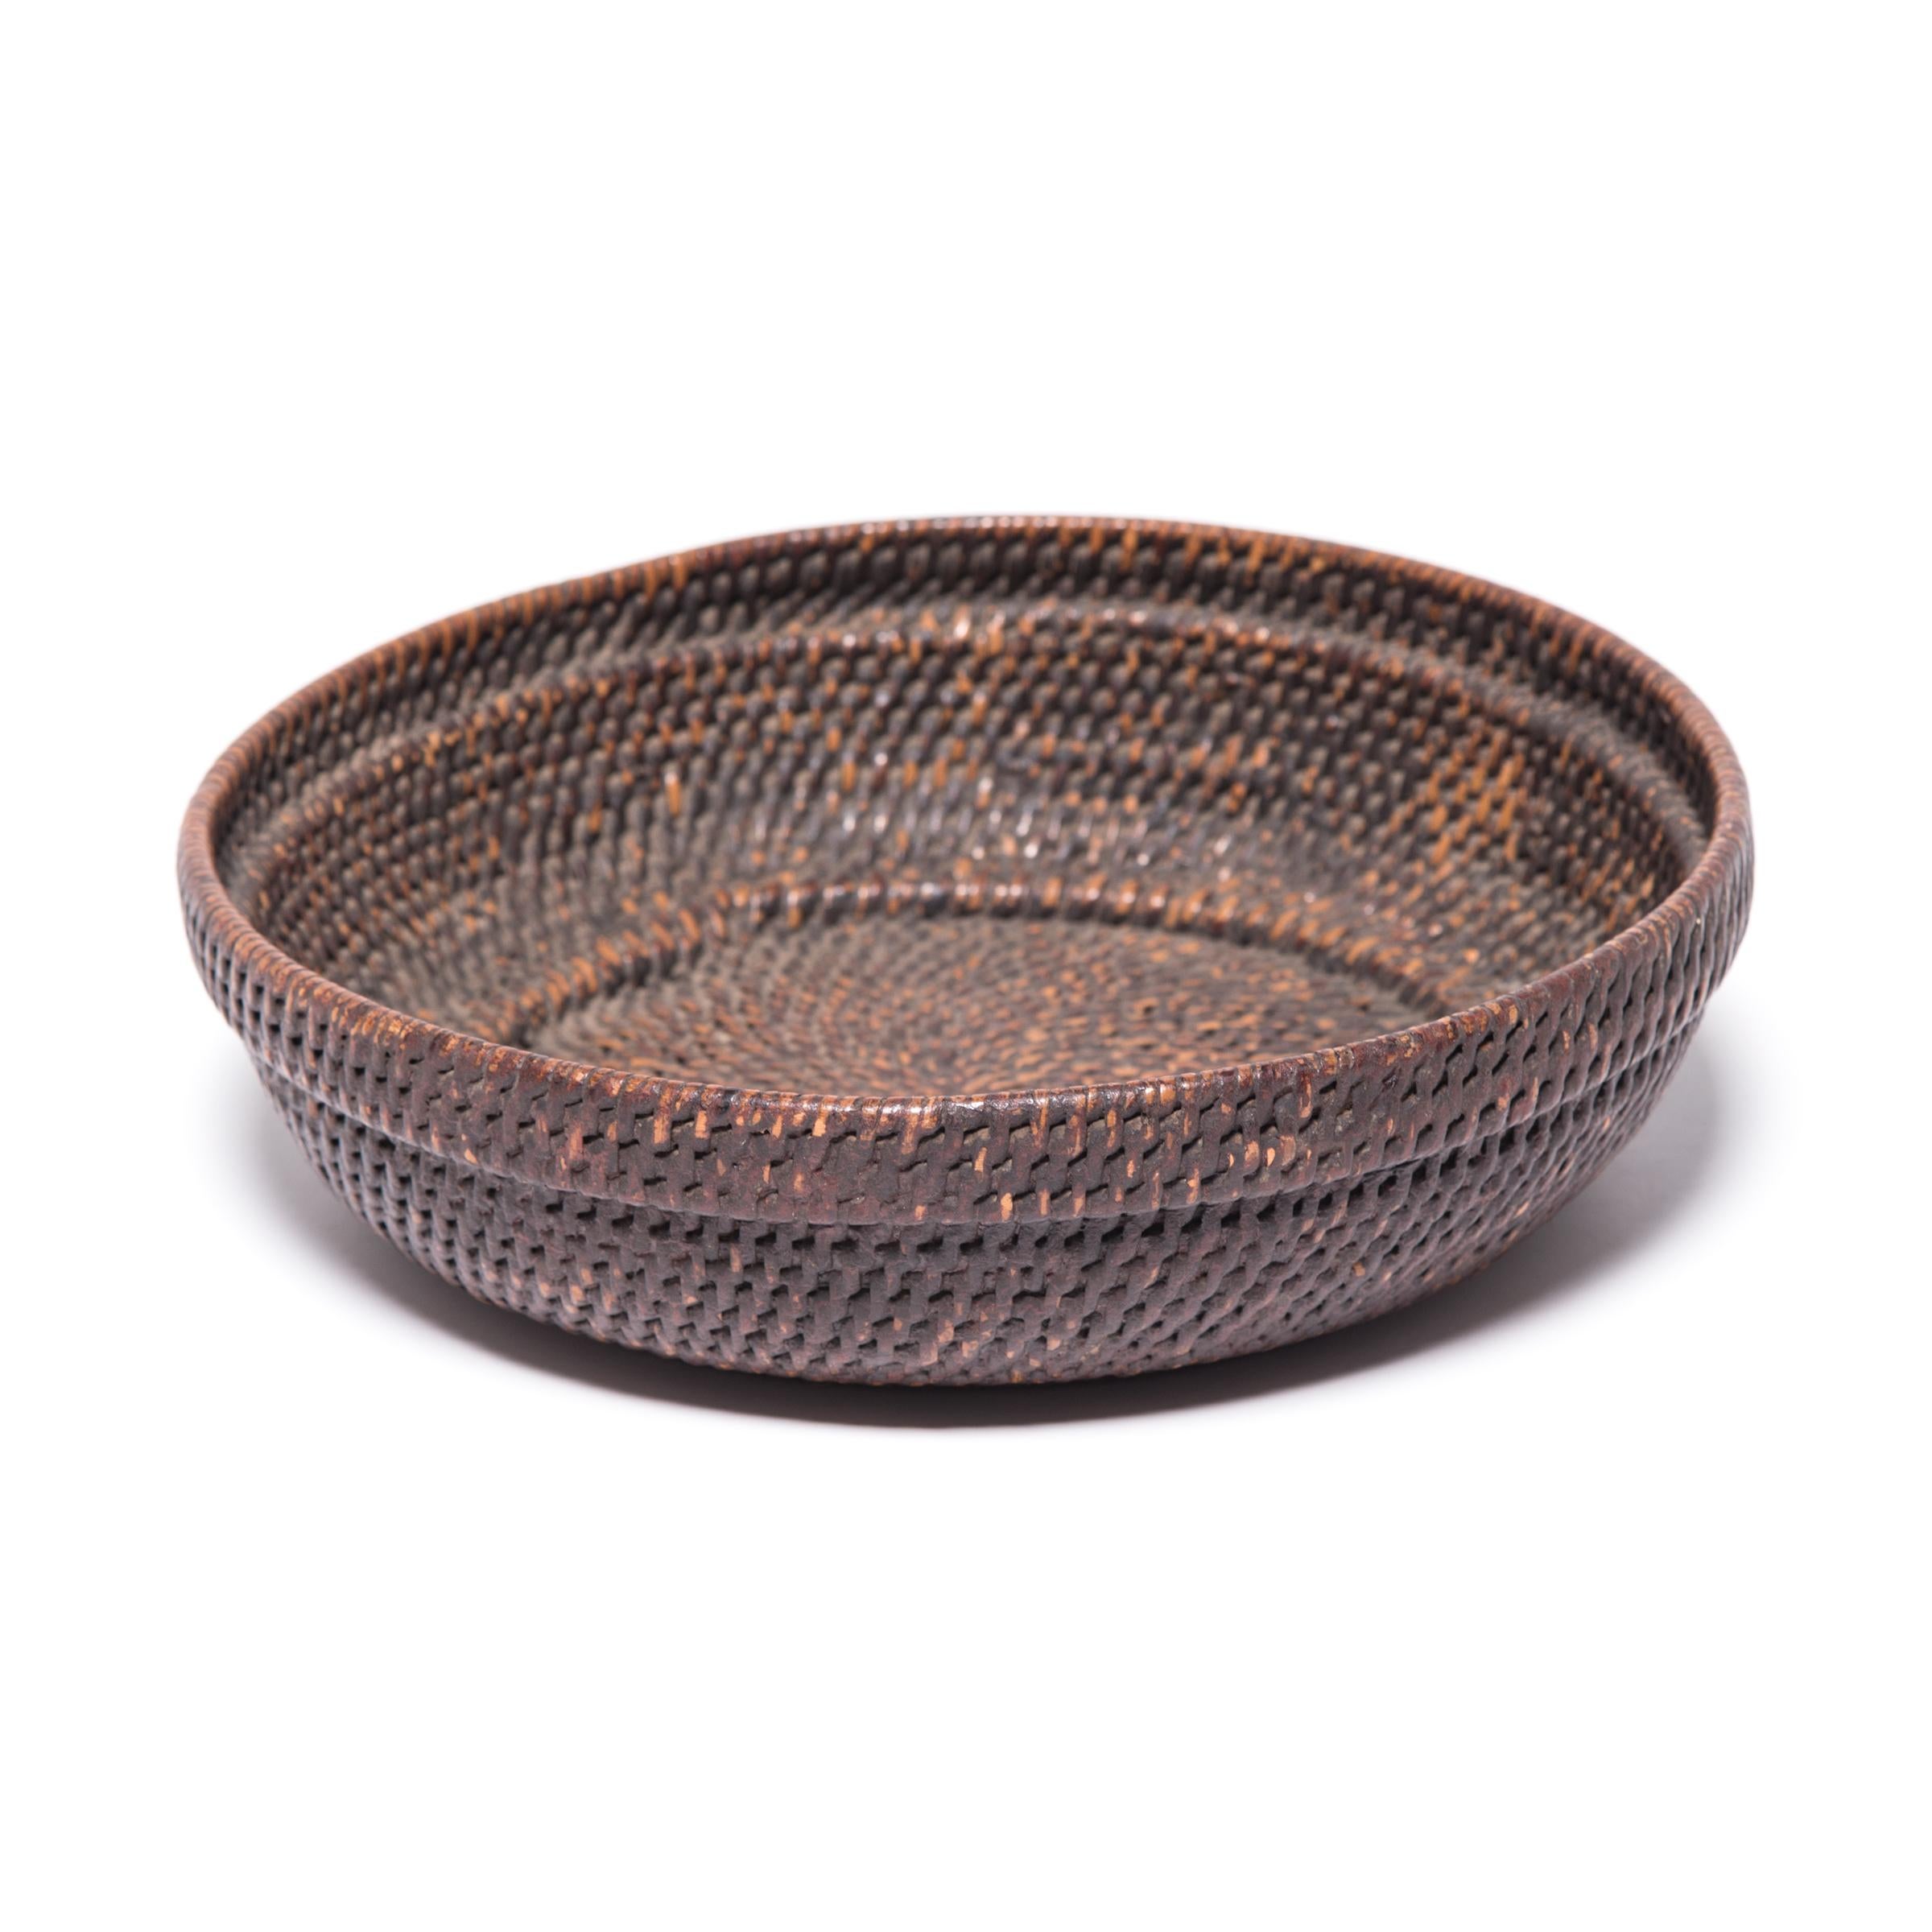 Chinese Early 20th Century Woven Offering Tray Basket